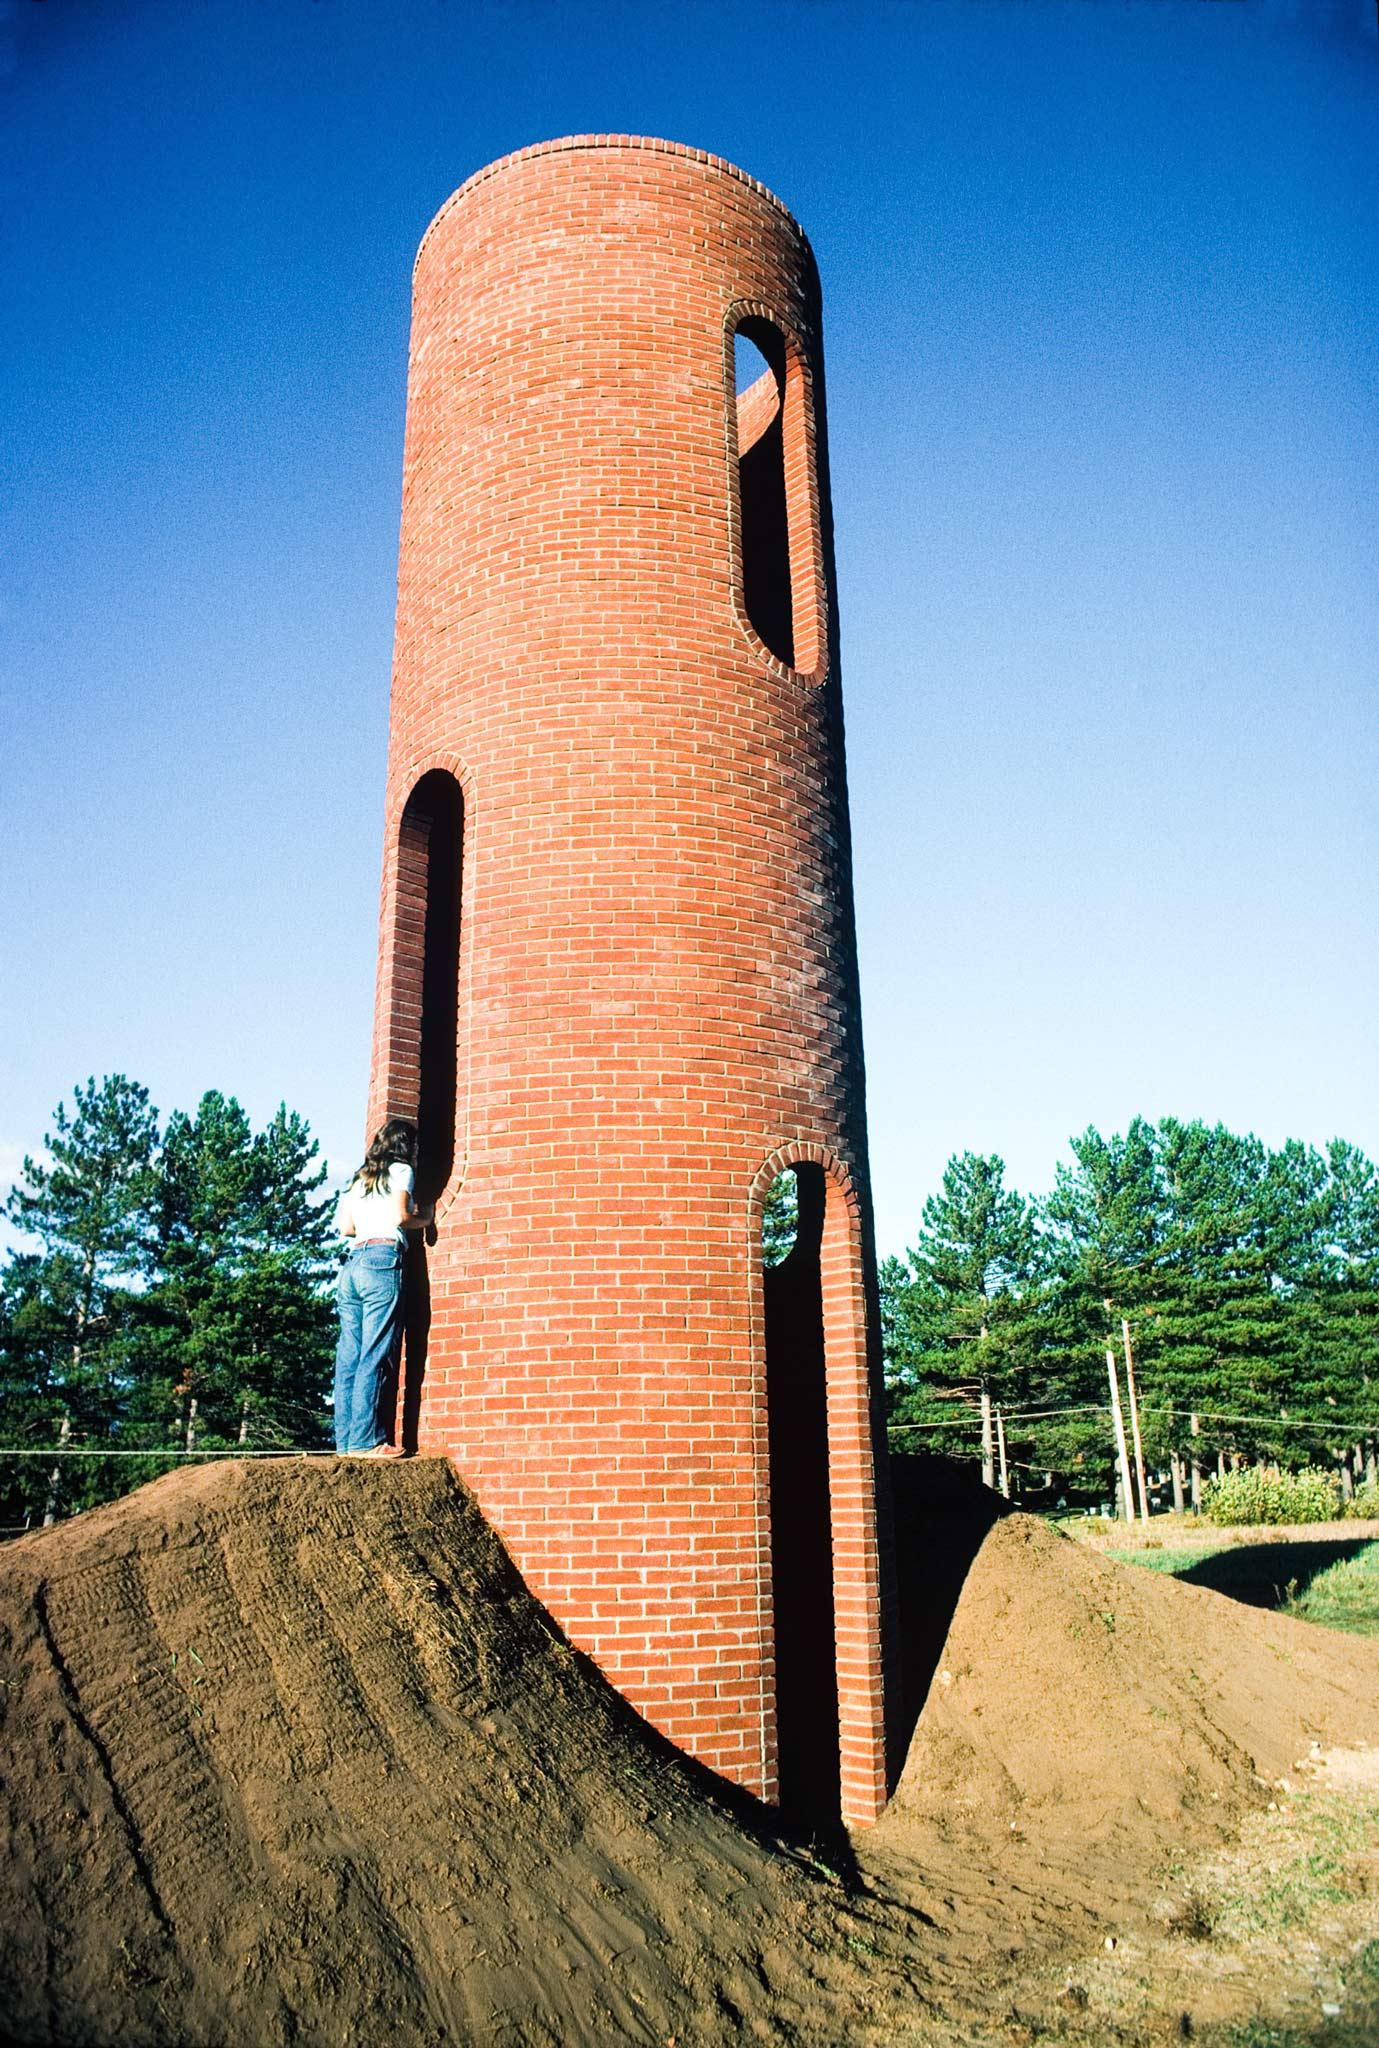 a figure peering into a window of a tall circular brick structure with round arched windows